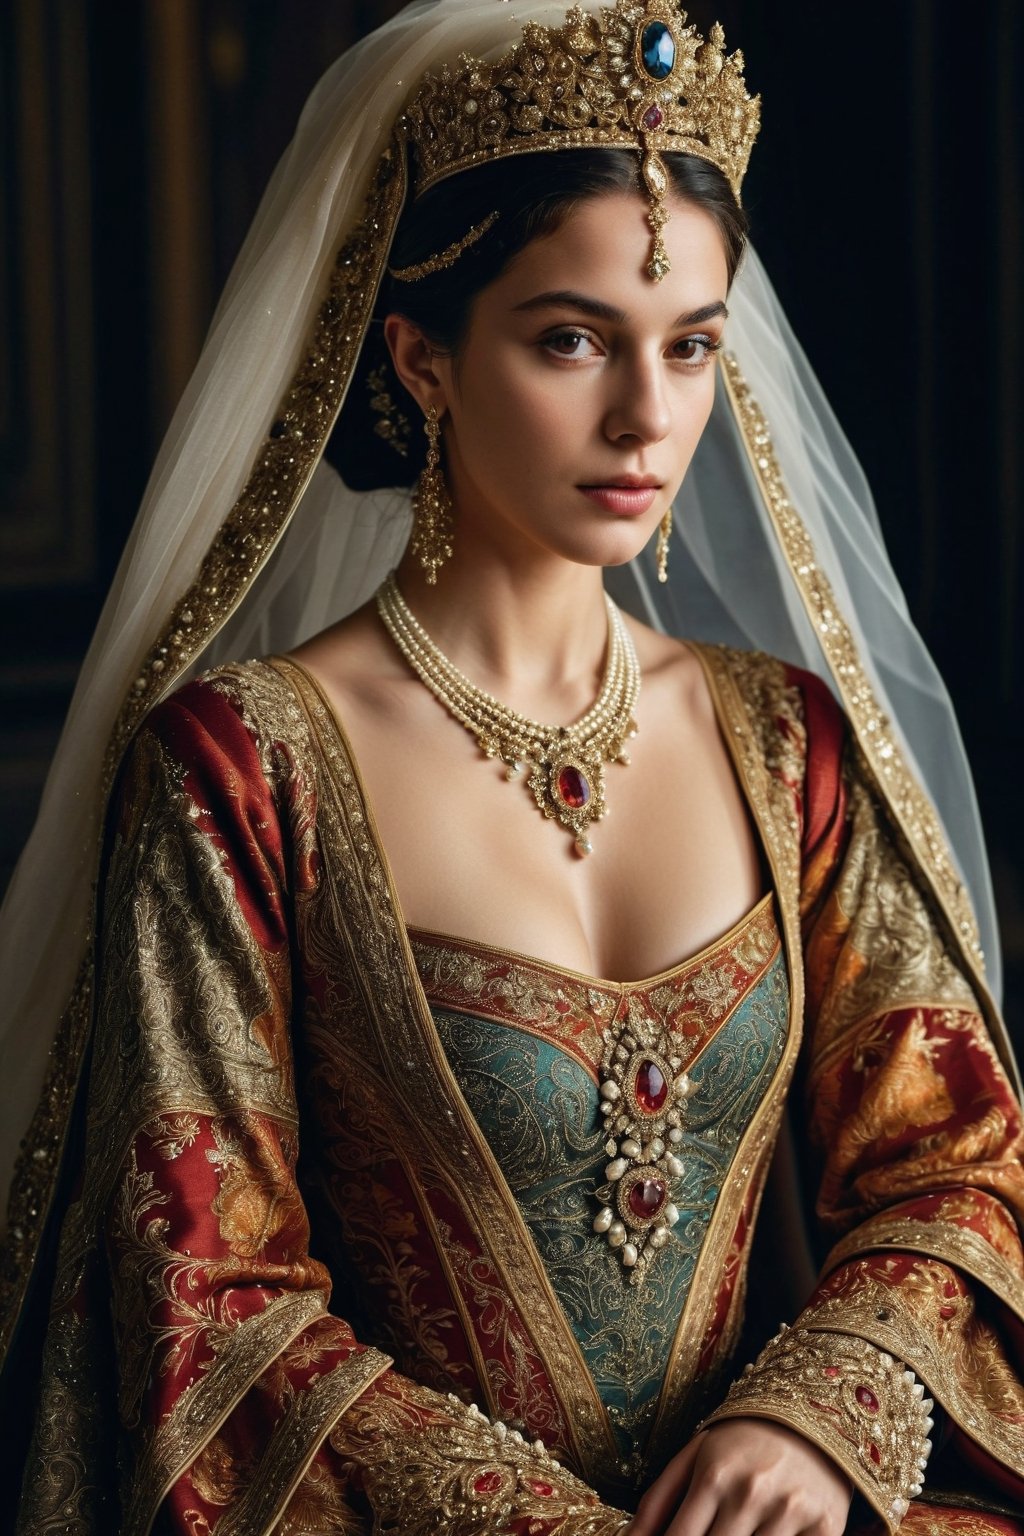 In medieval Russia, the Persian queen's dress is a masterpiece of opulence. The rich fabric, a blend of silk and brocade, shimmers with a golden sheen. Elaborate patterns of intertwining vines and intricate floral motifs, meticulously embroidered with threads of the finest gold, adorn the gown. The bodice is fitted and adorned with rare gemstones, reflecting a kaleidoscope of colors as the queen moves. Layers of luxurious fabric cascade elegantly, creating a regal silhouette. The ensemble is completed with a headdress, where pearls and diamonds are meticulously arranged, framing the queen's face with an ethereal glow. Every detail embodies the queen's status, capturing the essence of medieval Russian royalty.